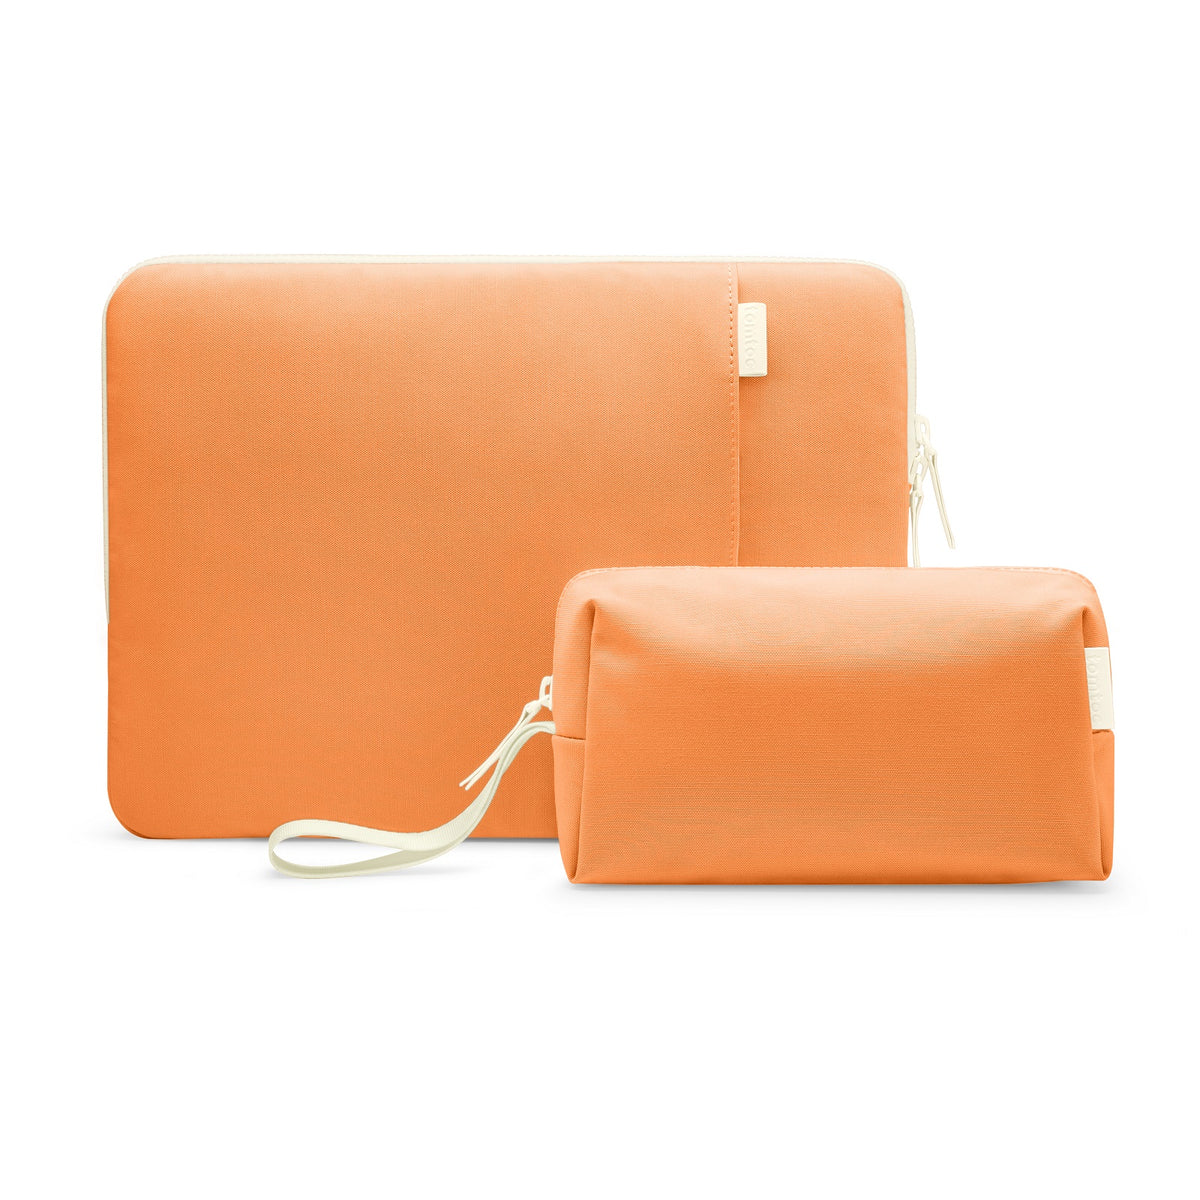 primary_tomtoc Lady Laptop Sleeve for 14-inch MacBook Pro M1 Pro/Max A2442 2021 | Orange